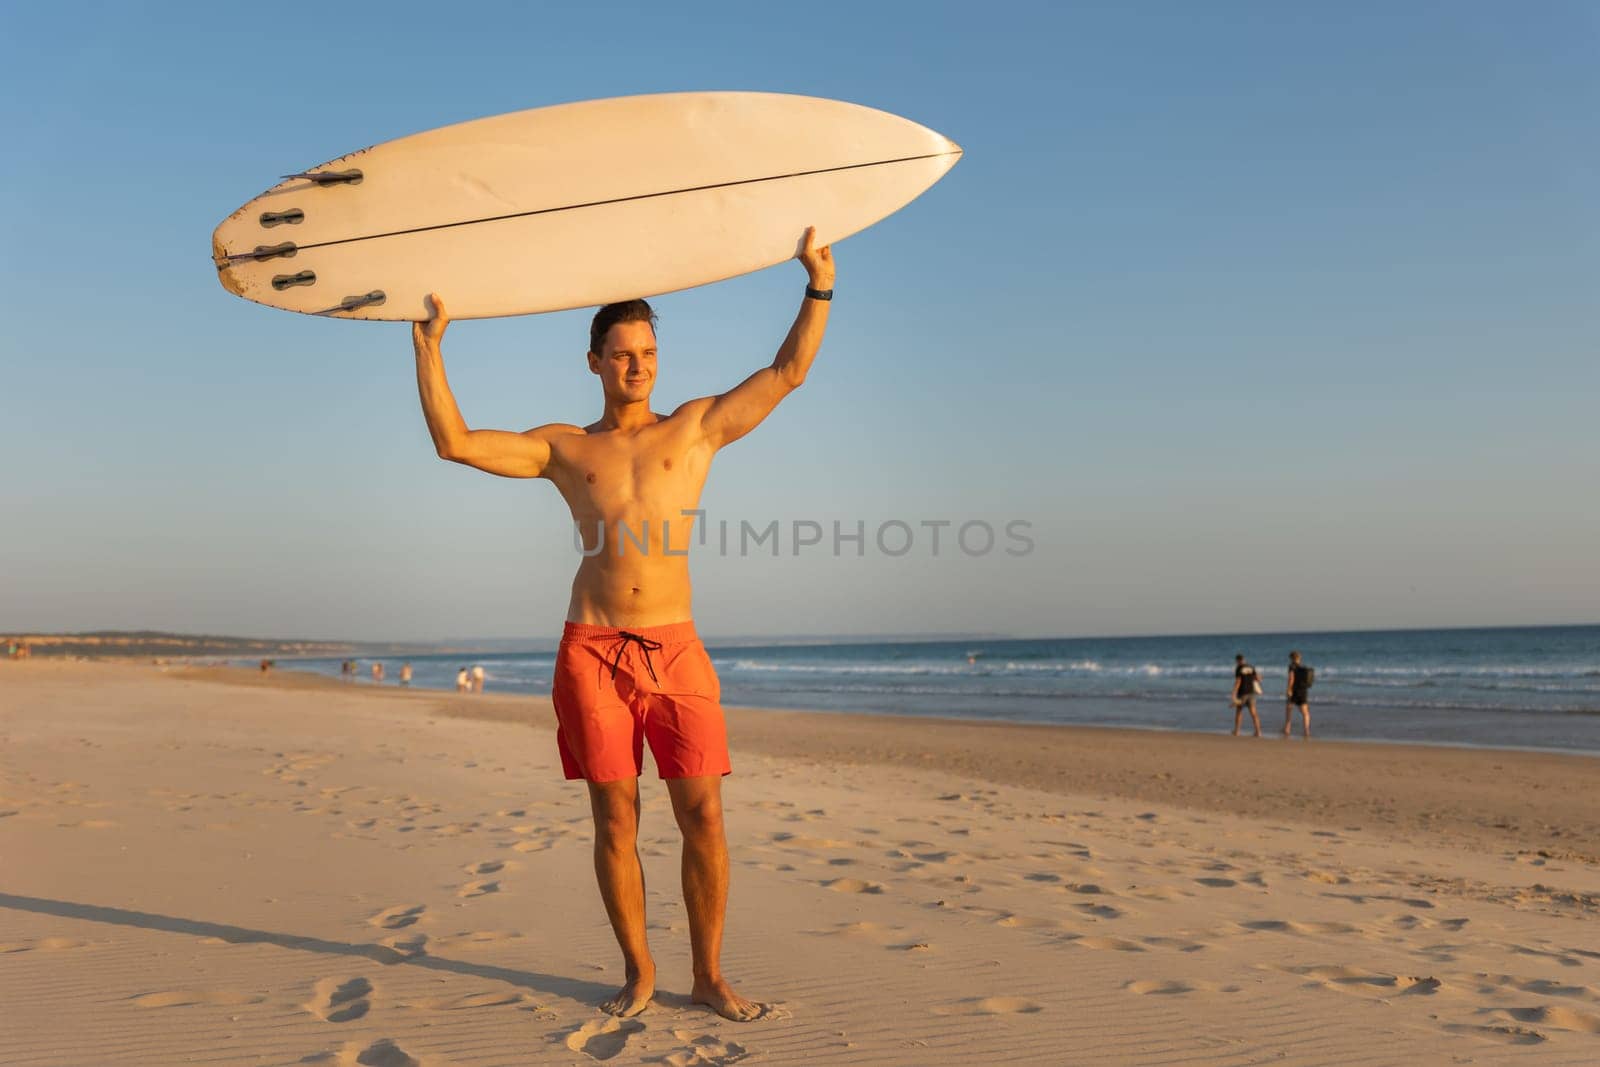 An attractive man with nice athletic body standing on the shore holding a surfboard above his head. Mid shot